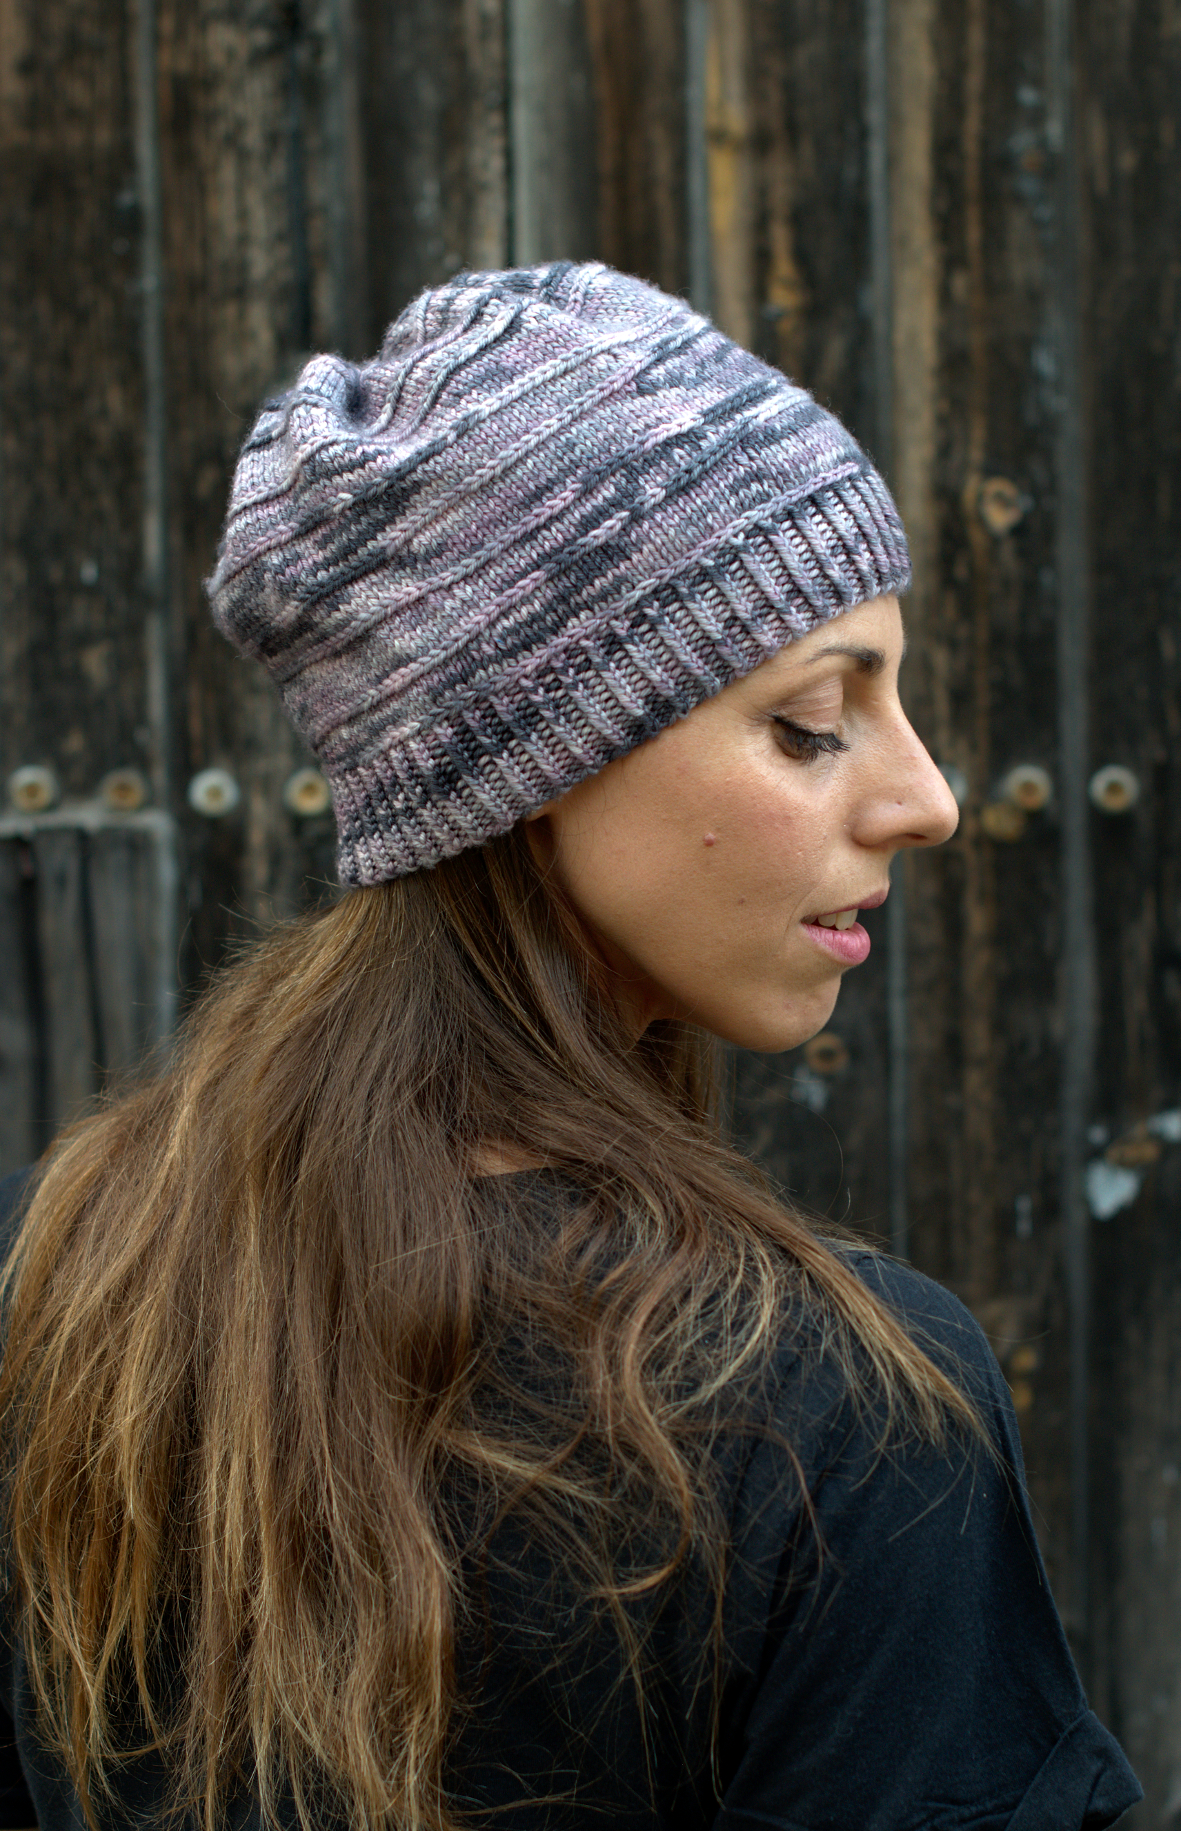 Contoura hand knitting pattern for slouchy beanie Hat featuring short rows